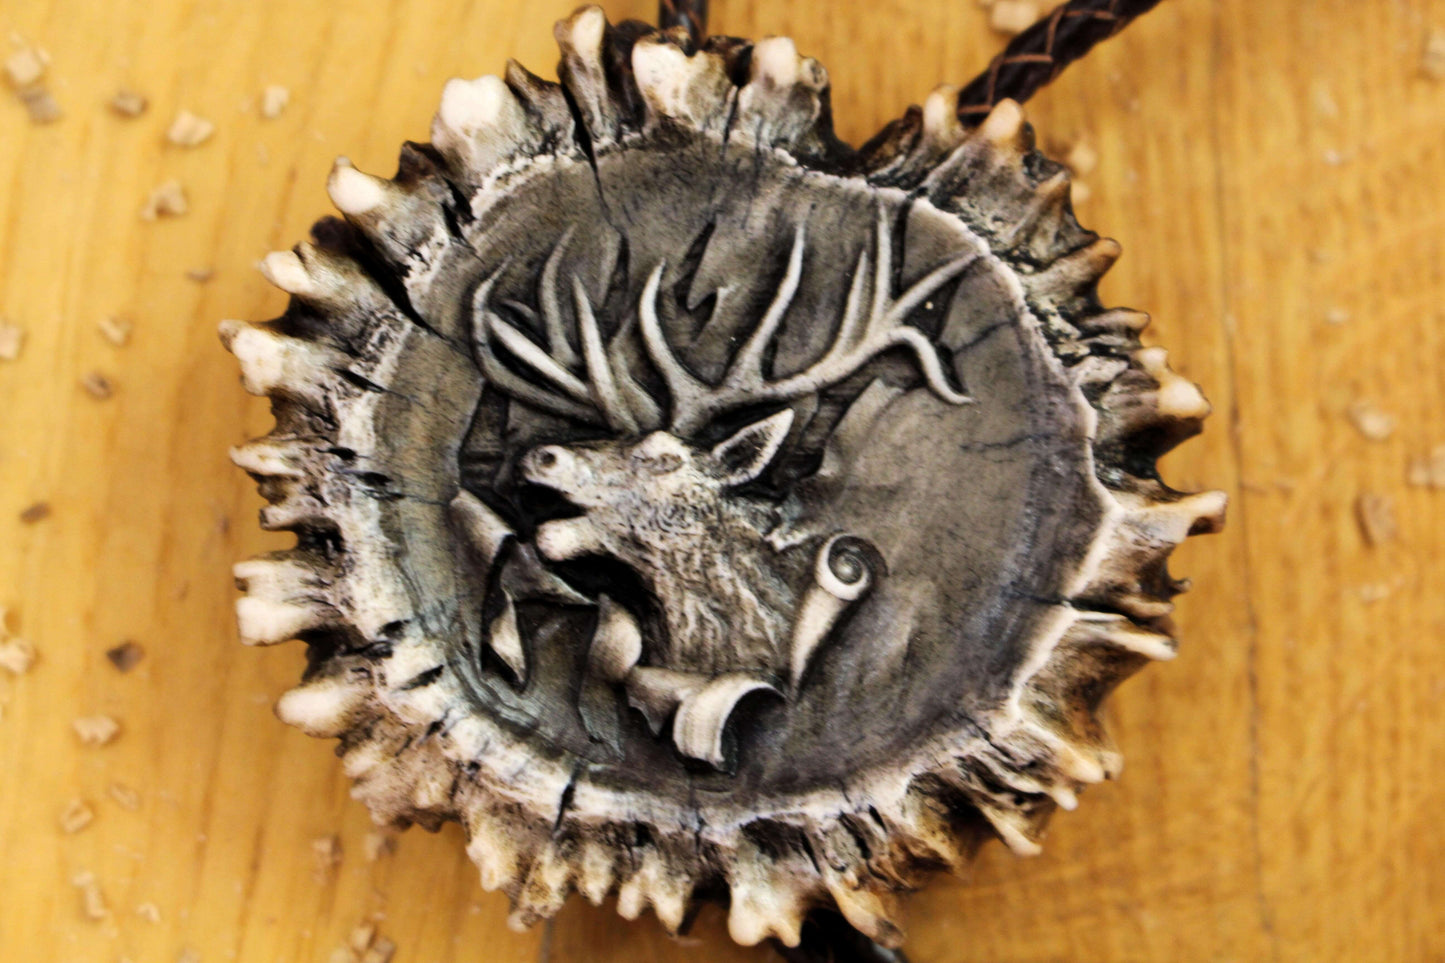 Handcrafted Bolo Tie close up image which is made from Deer Antler